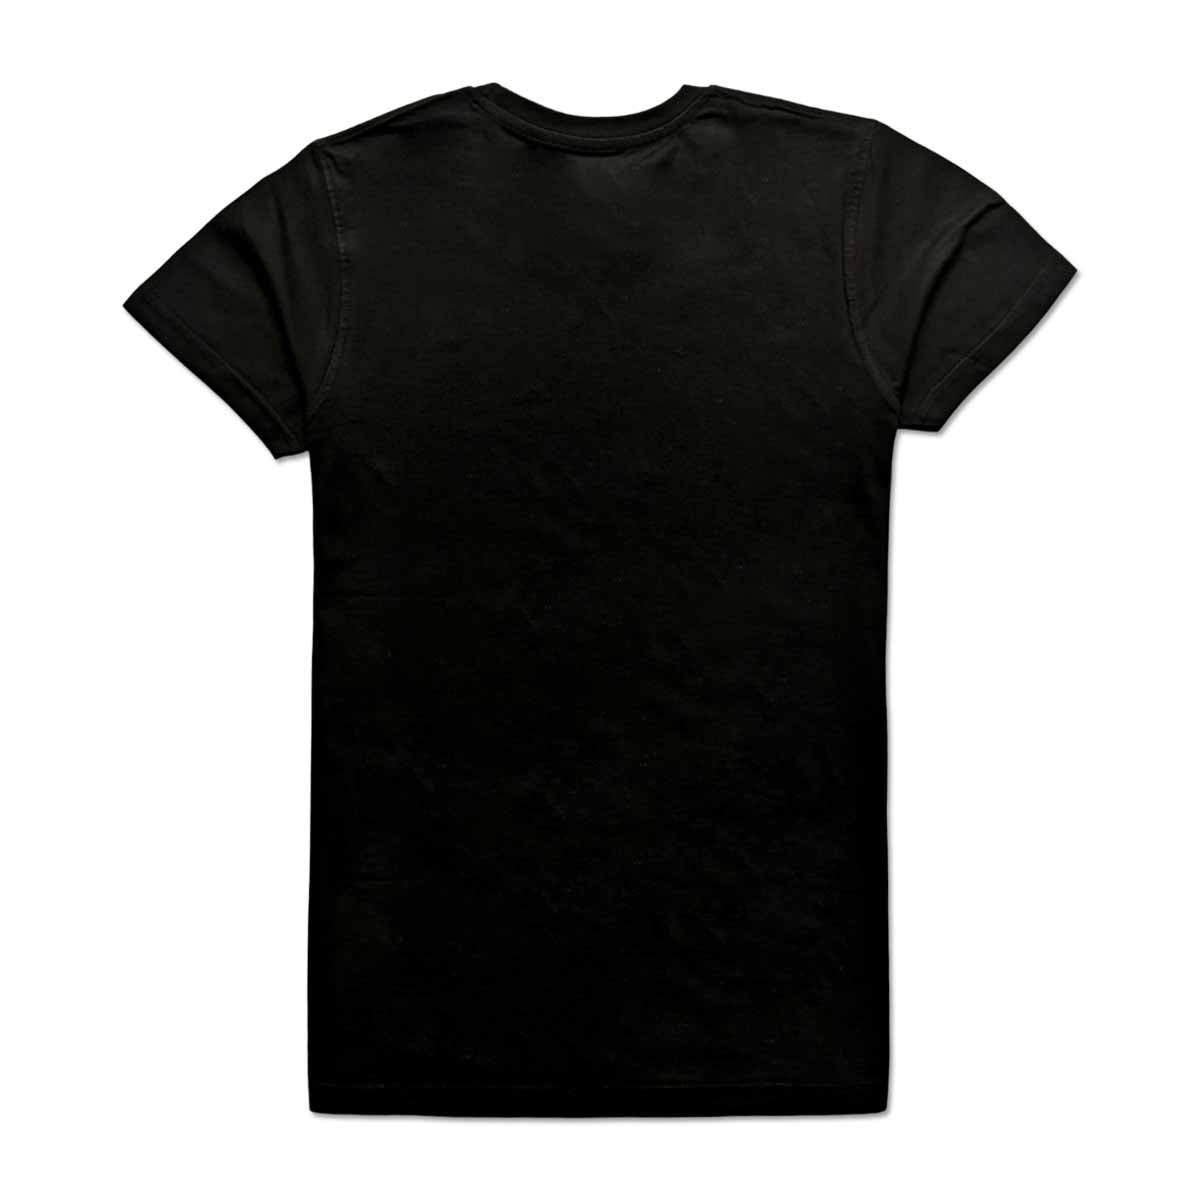 Brand Expo Premium Quality Branded T-Shirts for Men's